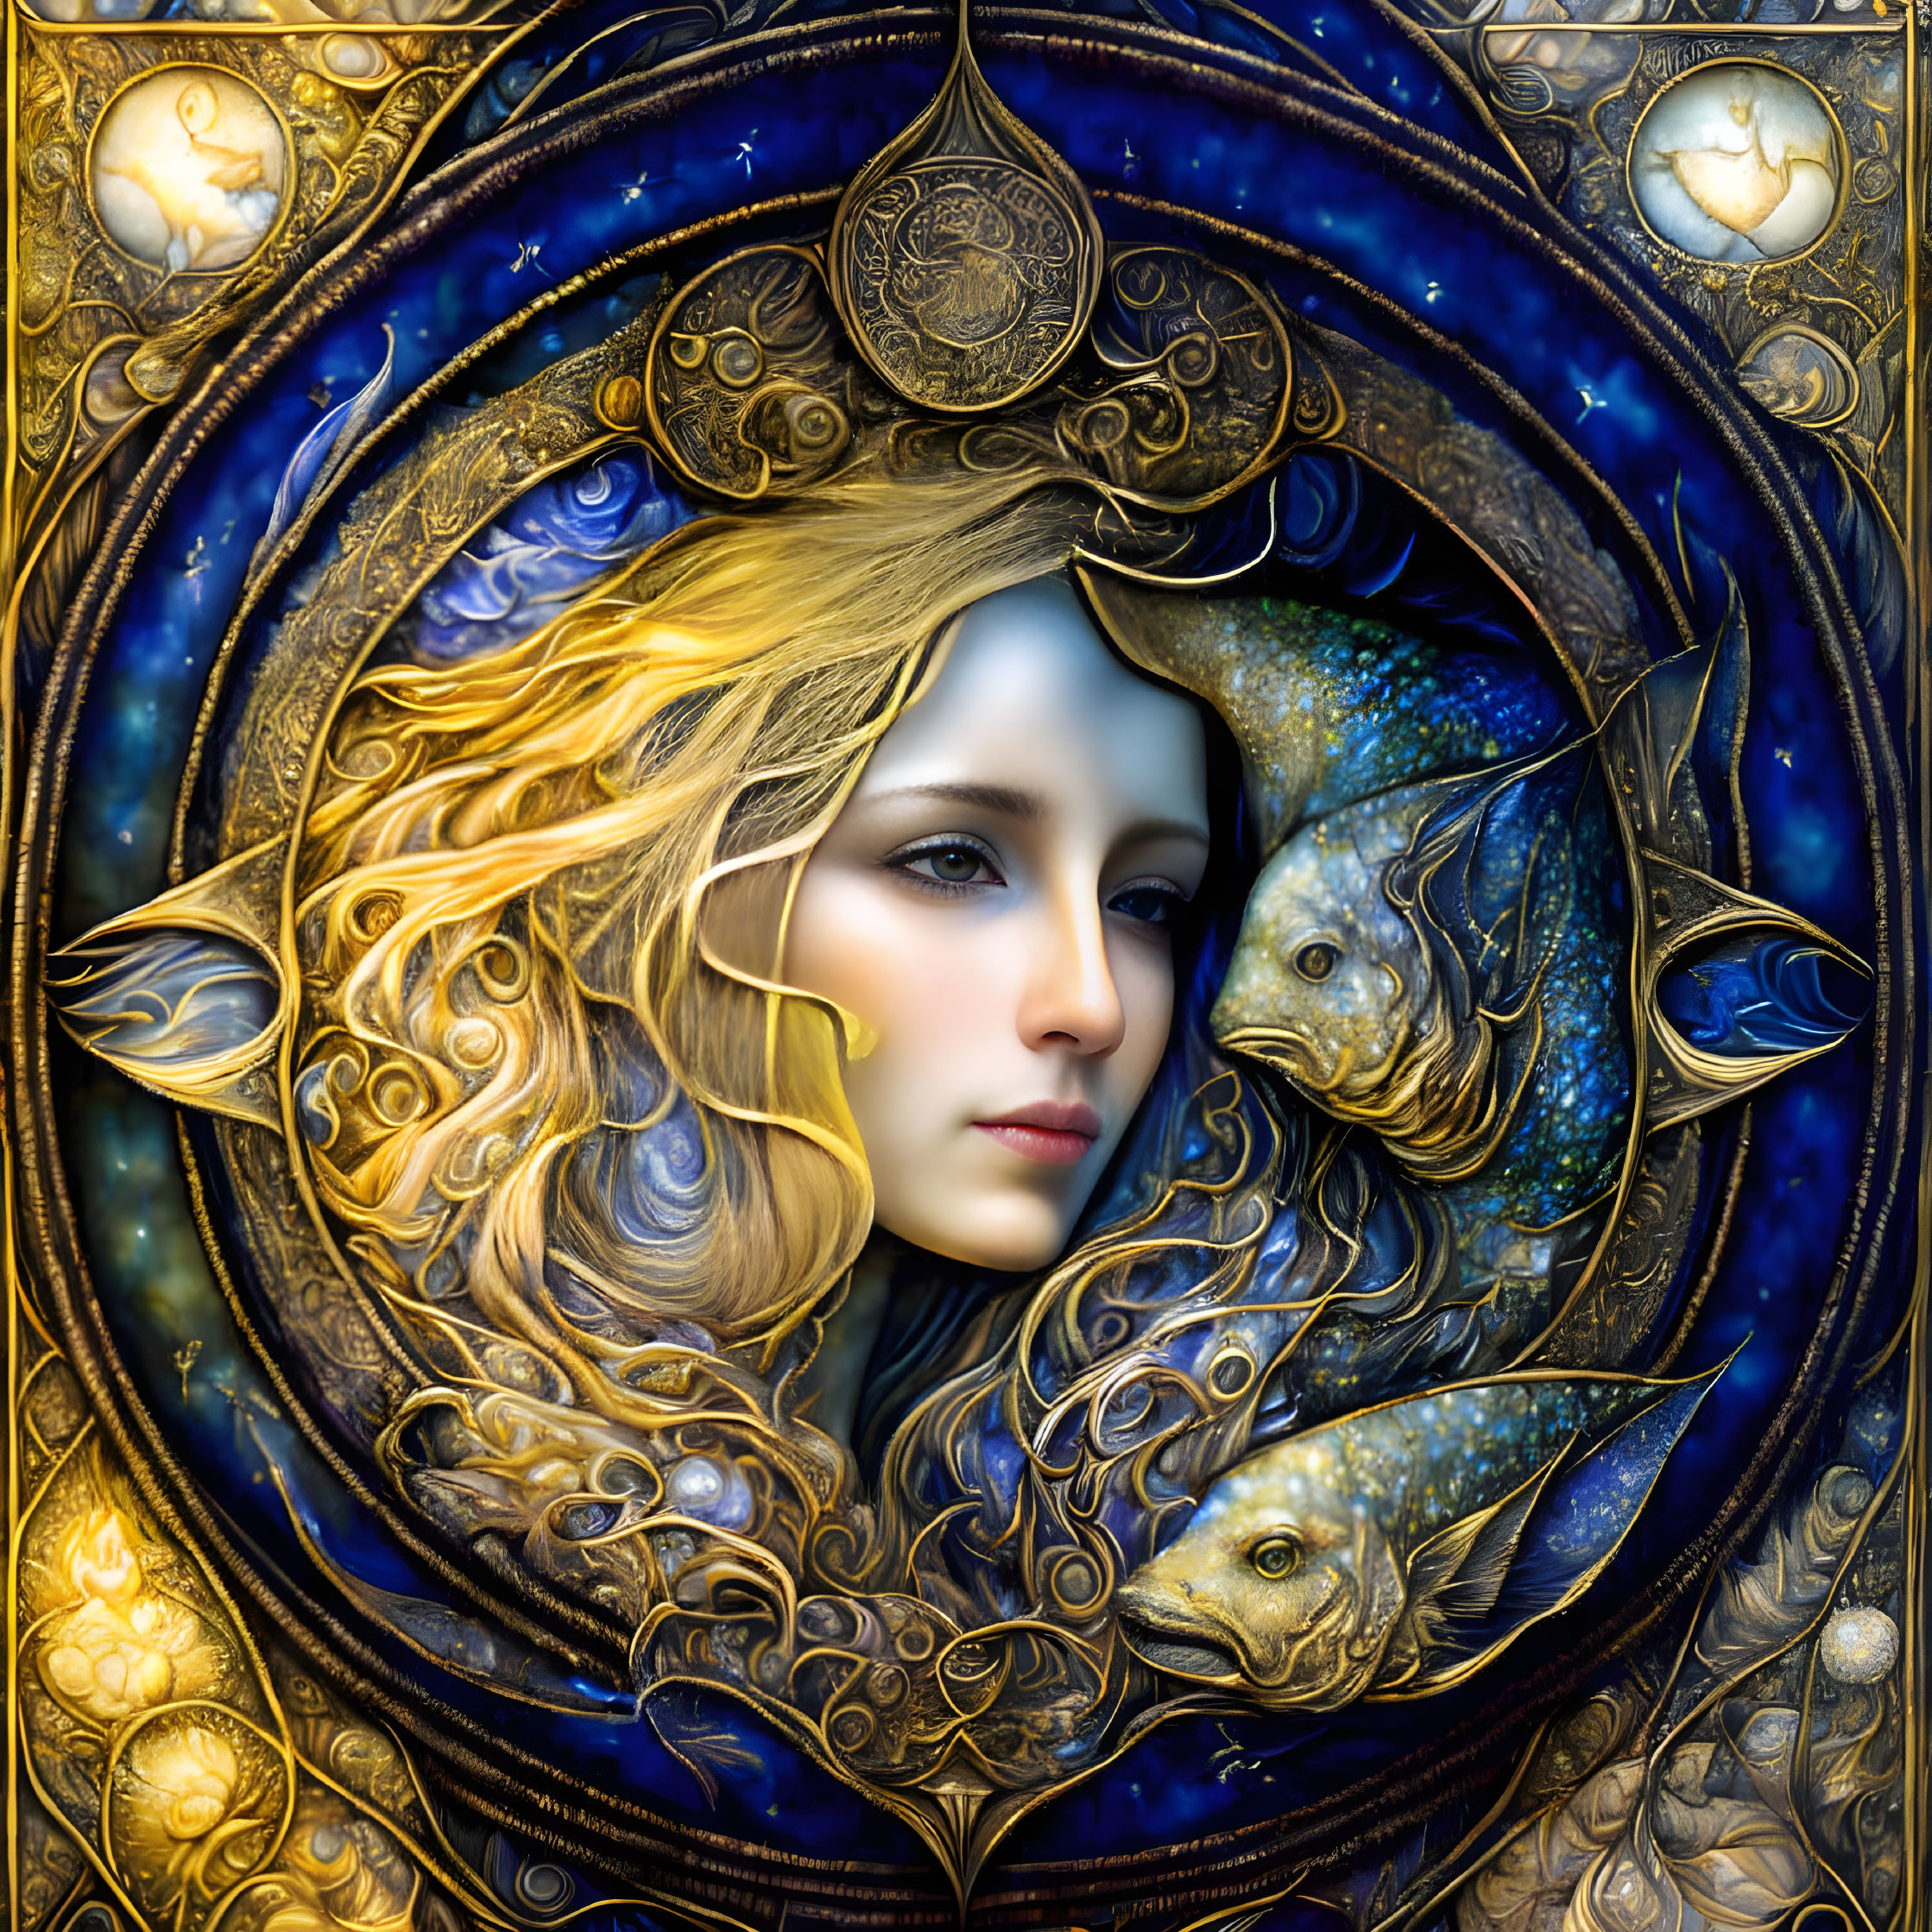 Fantasy-themed illustration of woman's face with celestial creatures in circular frame